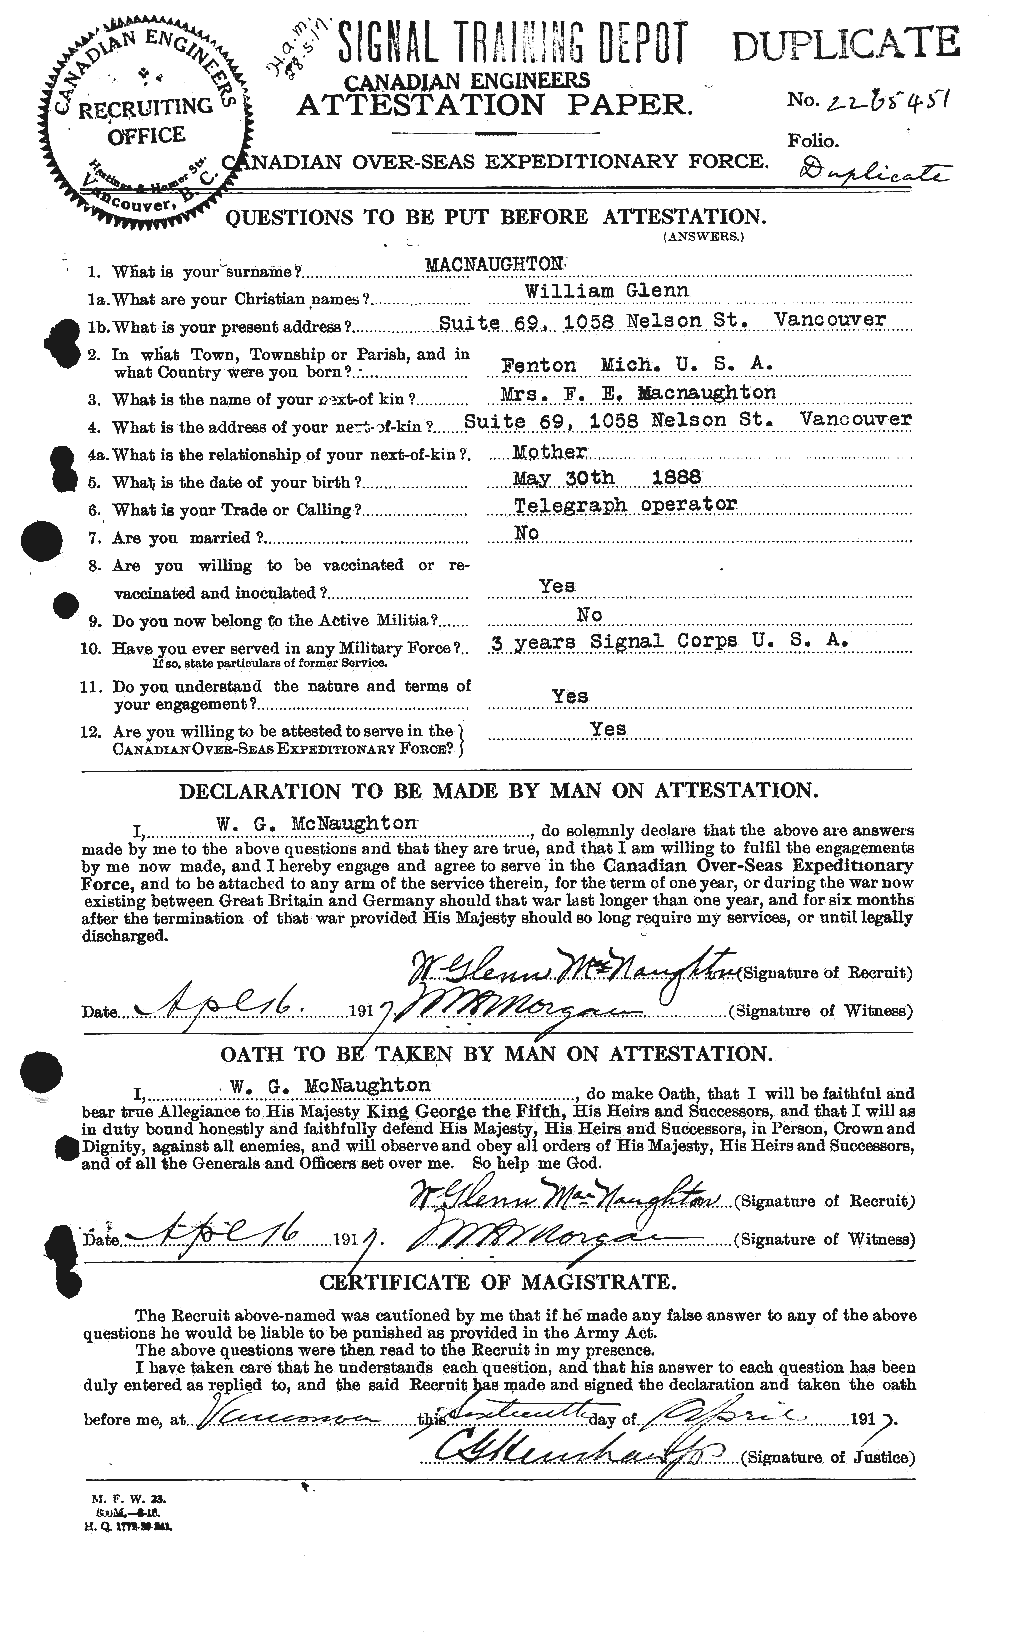 Personnel Records of the First World War - CEF 541600a